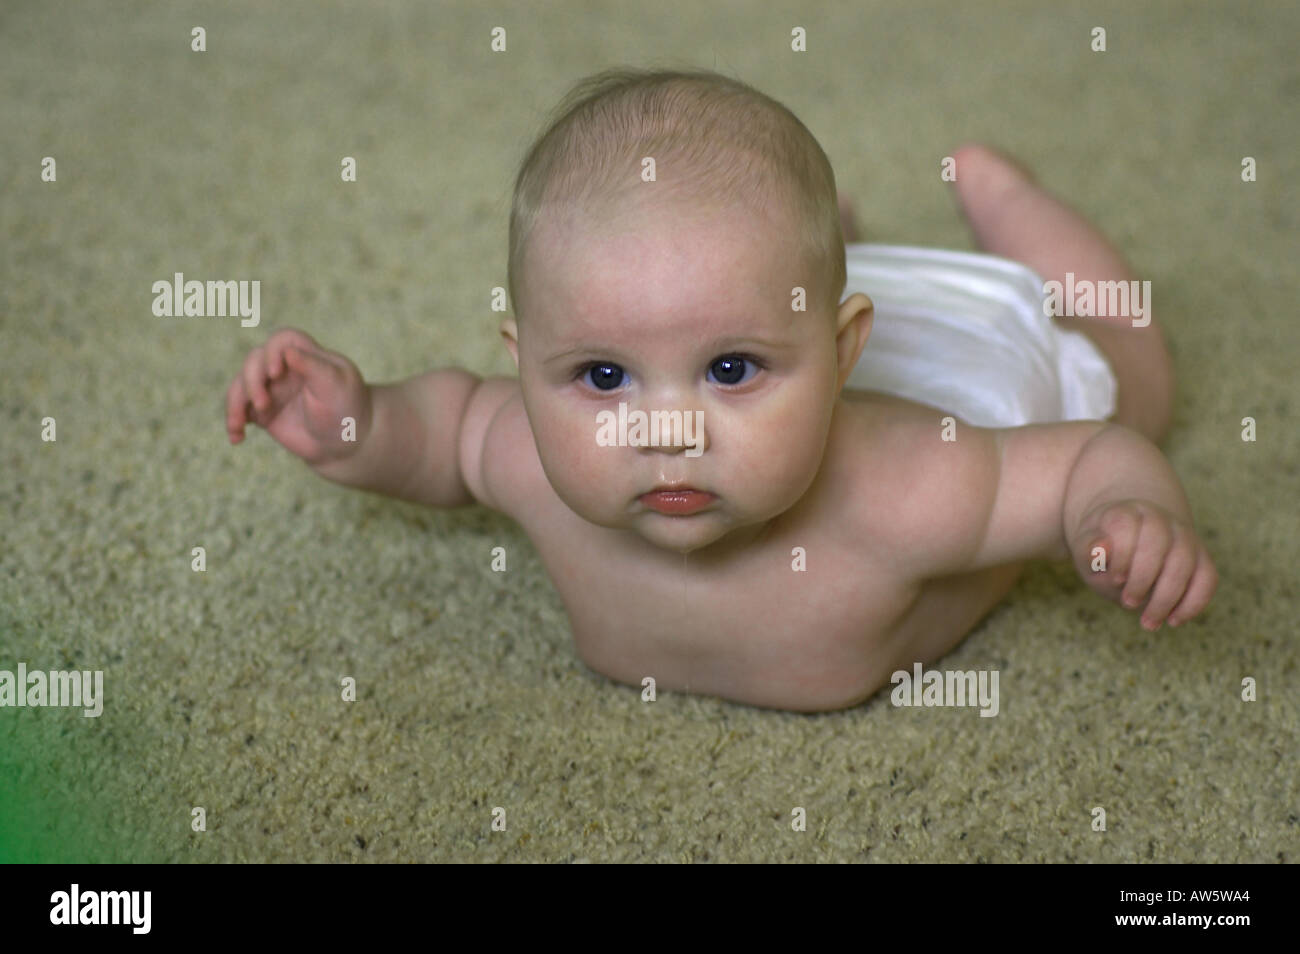 baby on rug with head up Stock Photo